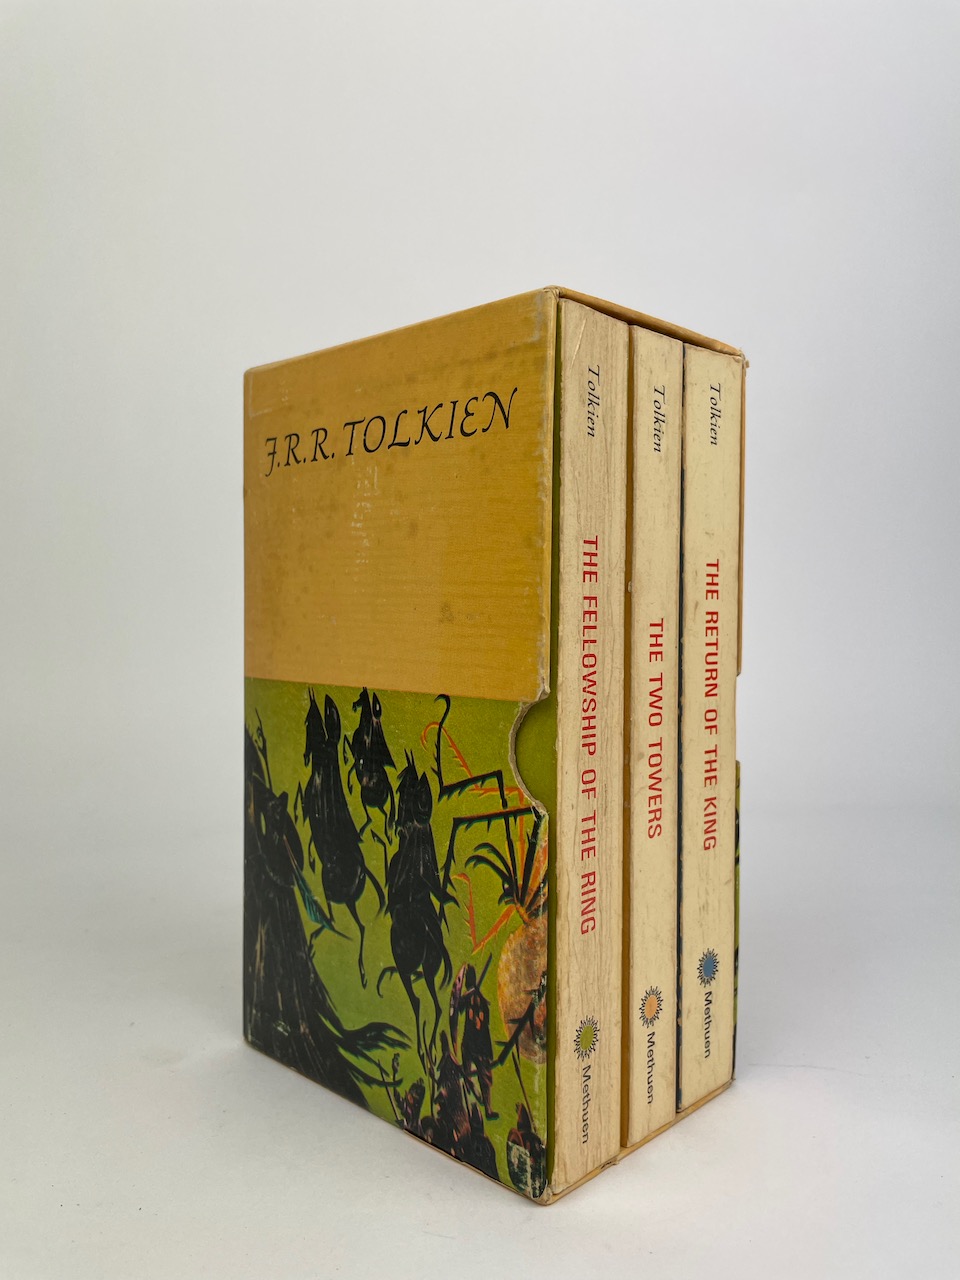 J.R.R. Tolkien, The Lord of the Rings in slipcase released in 1973 by Methuen Publications 1